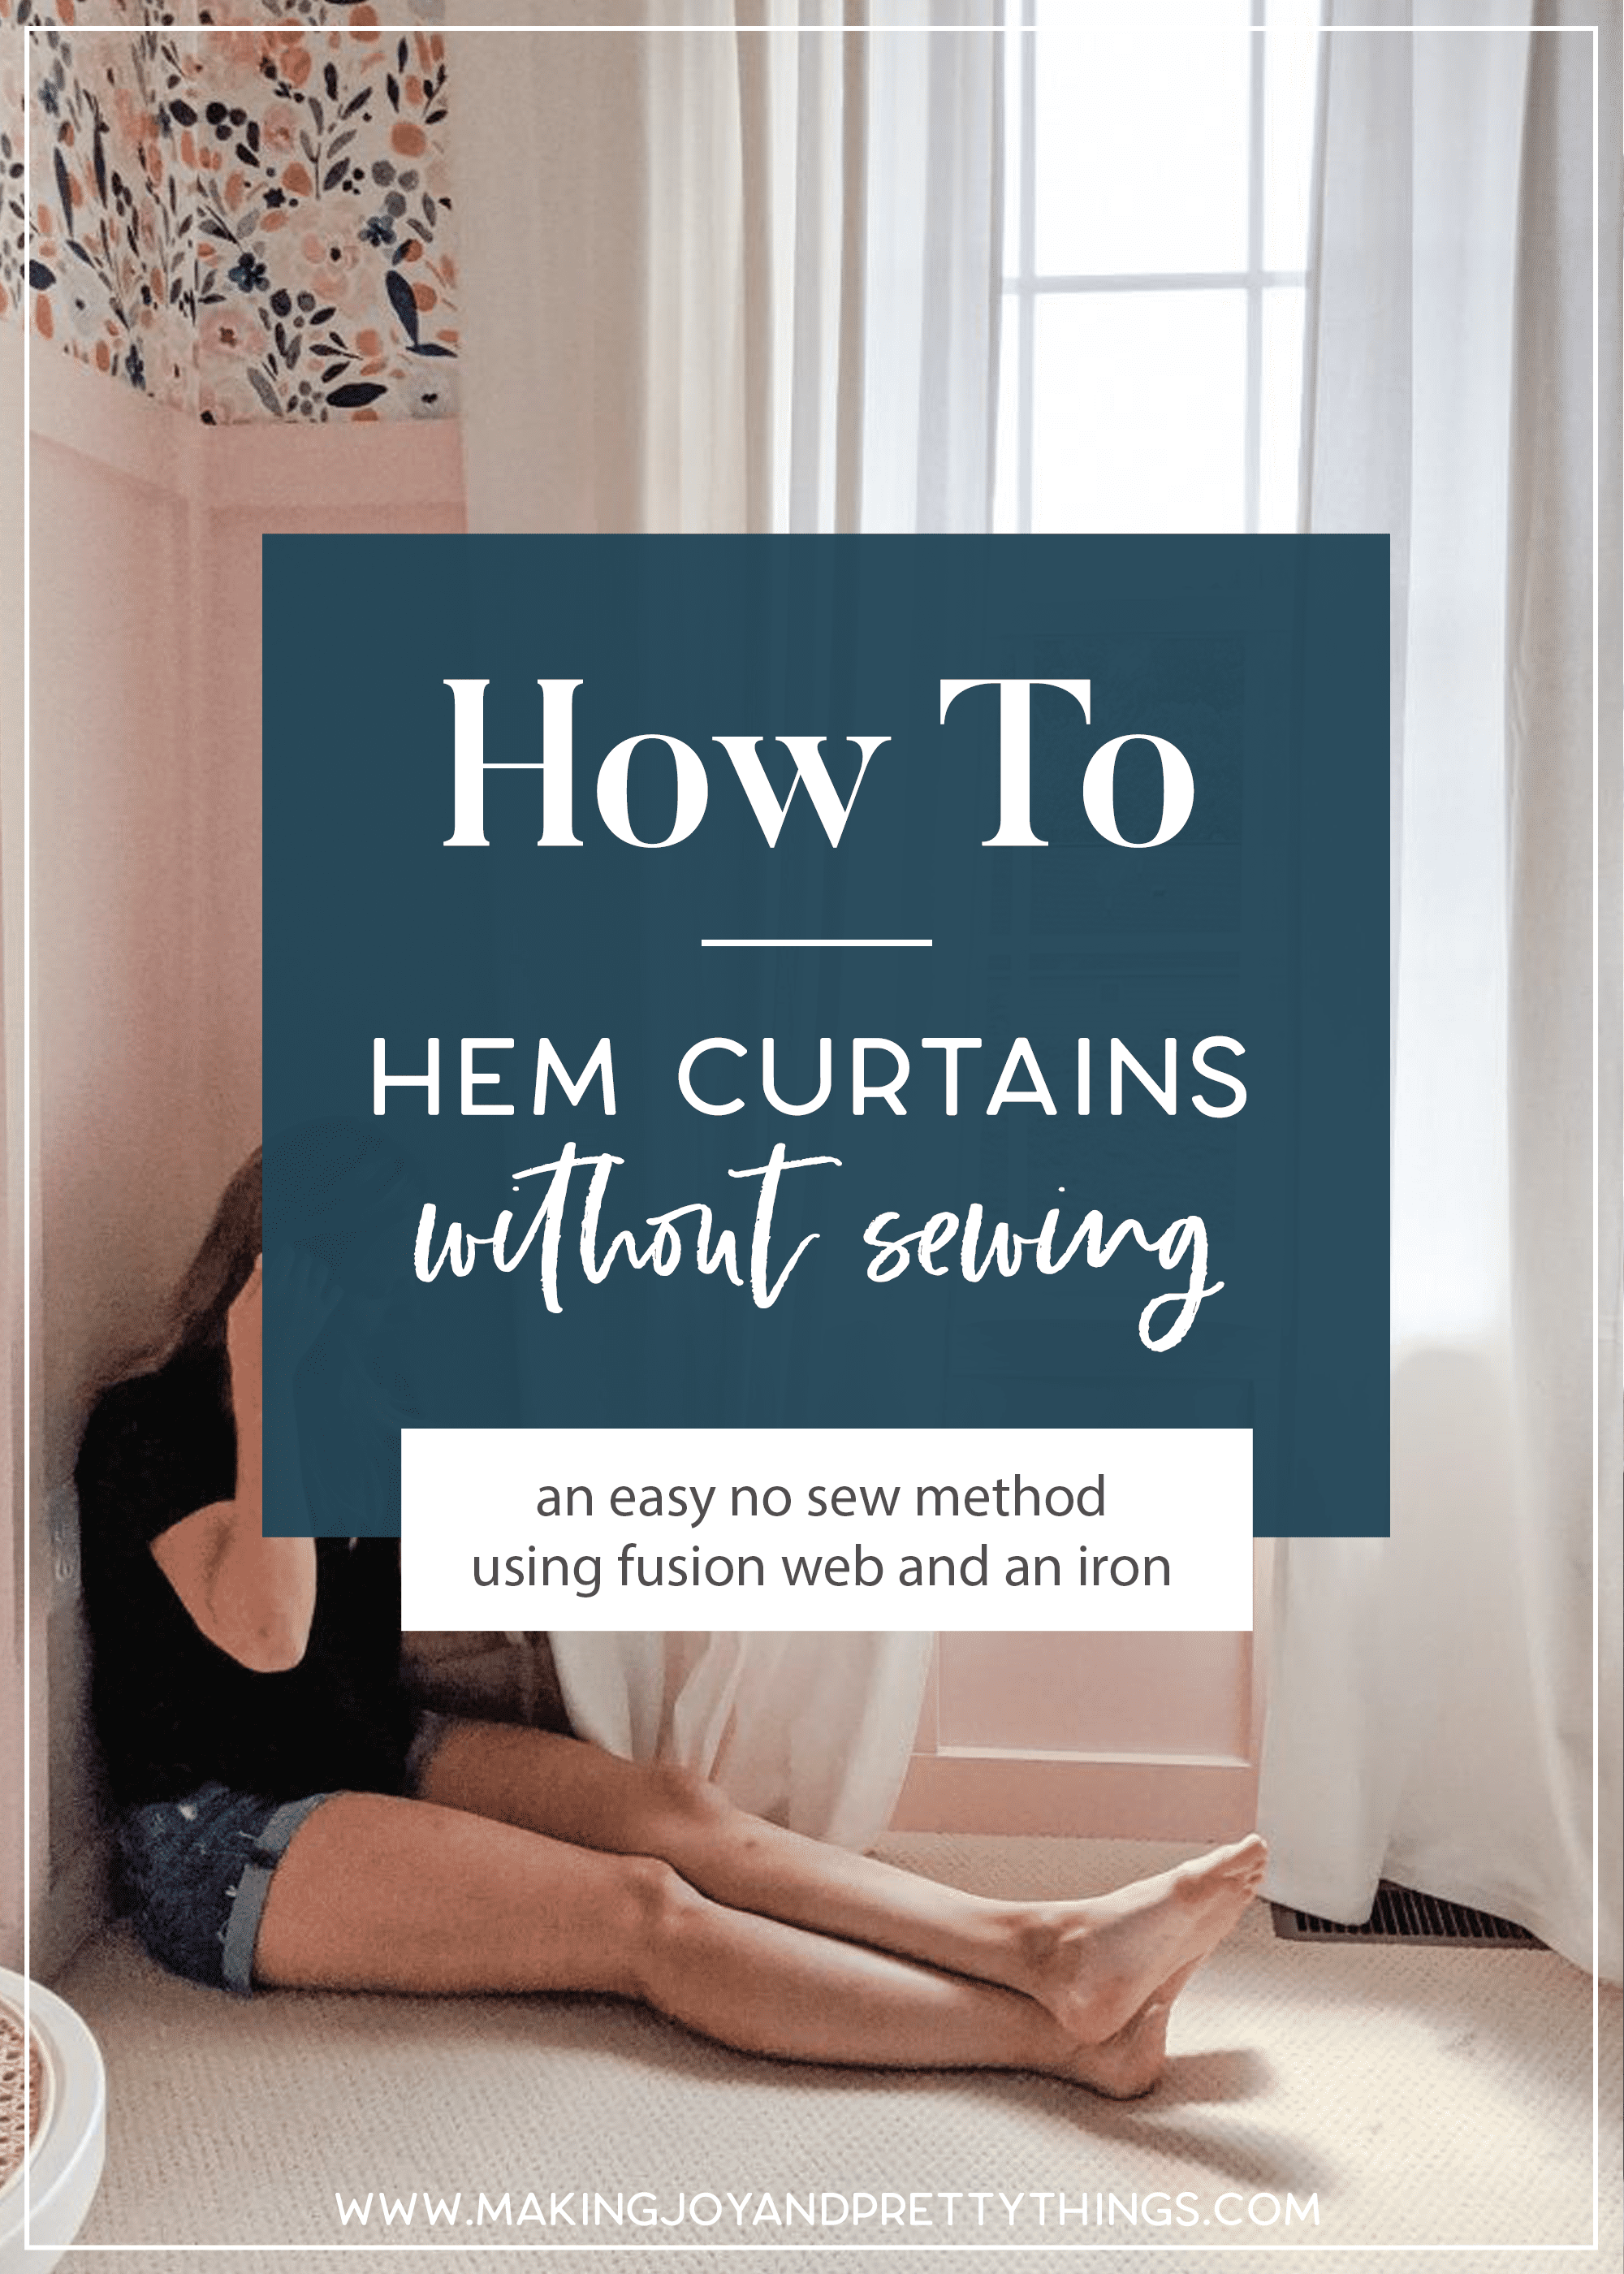 Today I’m sharing how to hem curtains without sewing.  Curtains should just barely touch the floor or hover just slightly over the floor.  In order to hem curtains, you normally have to hem curtains with a sewing machine.  Since I don’t know how to sew, I’m going to show you how to hem curtains with hem tape and an iron.  Let’s hem curtains the easy way with a no sew method.  All you need for no sew curtains is hem tape and an iron.  For this project I used fusing web!  #curtains #howtohemcurtains #hemcurtains #nosewcurtains 